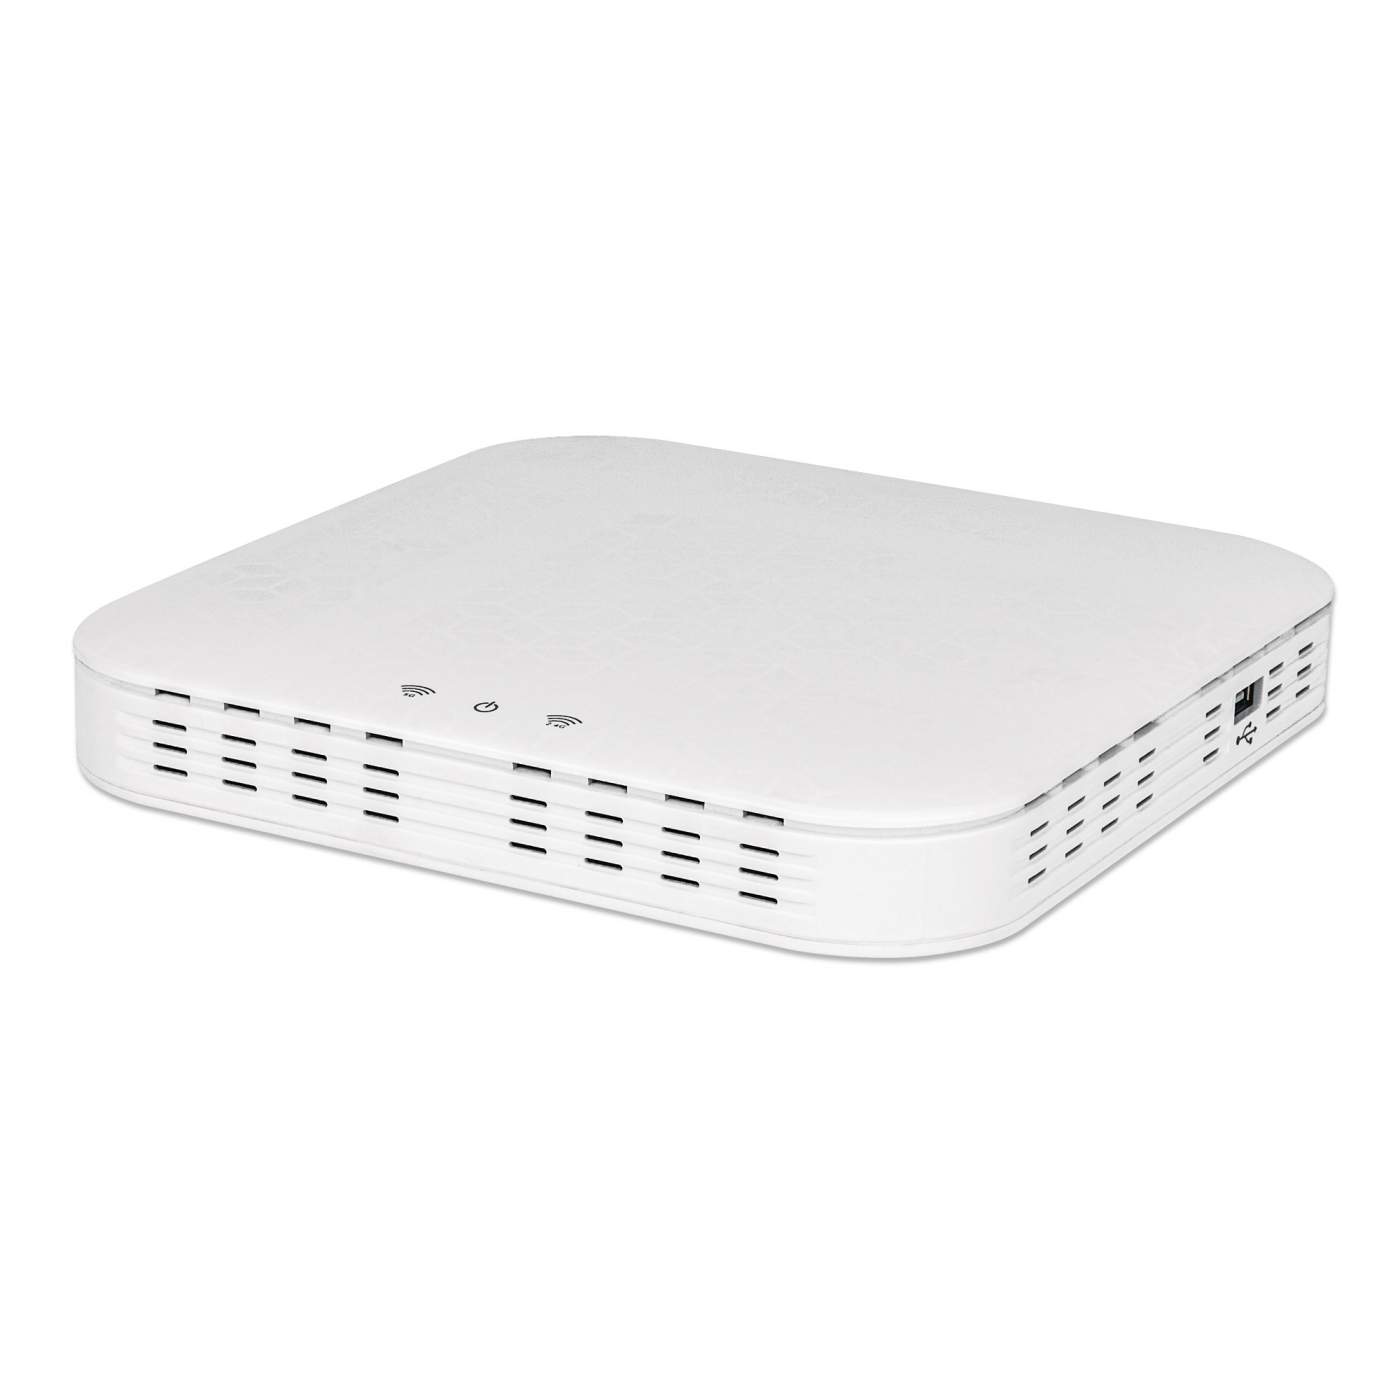 Manageable Wireless AC1300 Dual-Band Gigabit PoE Indoor Access Point and Router Image 1